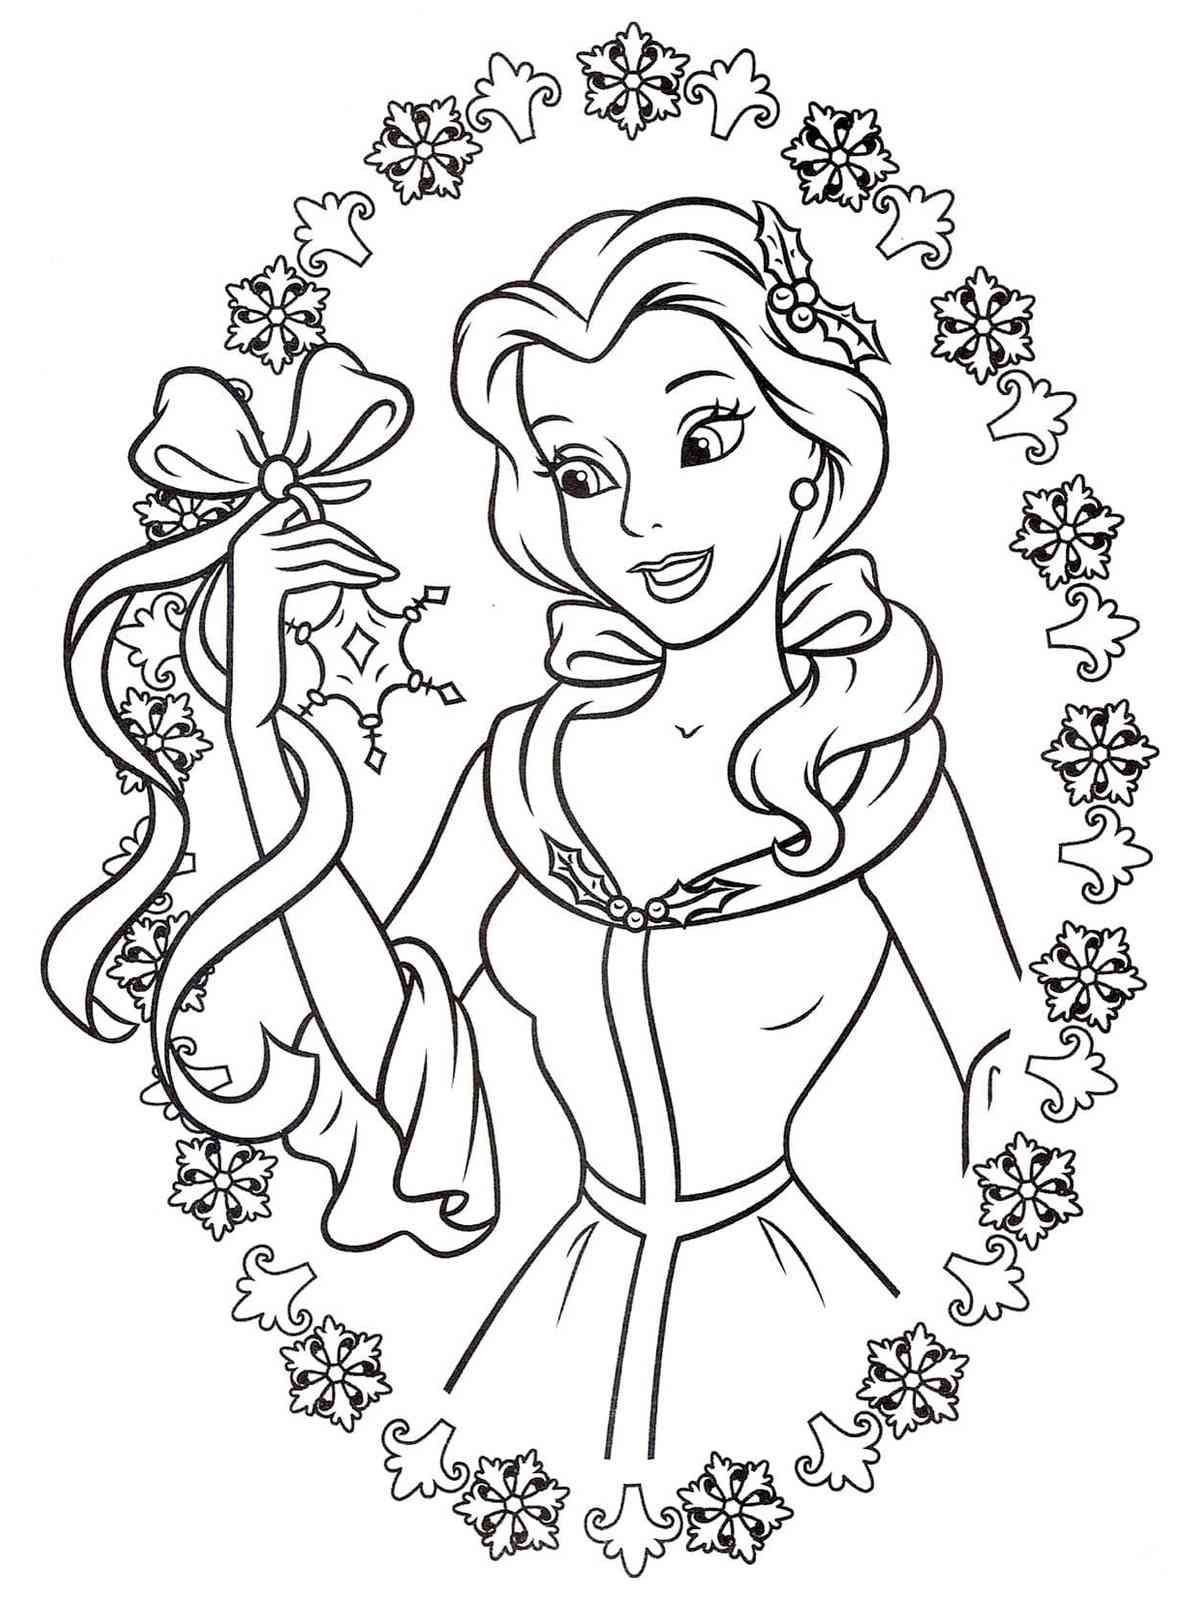 Belle holds a snowflake coloring page